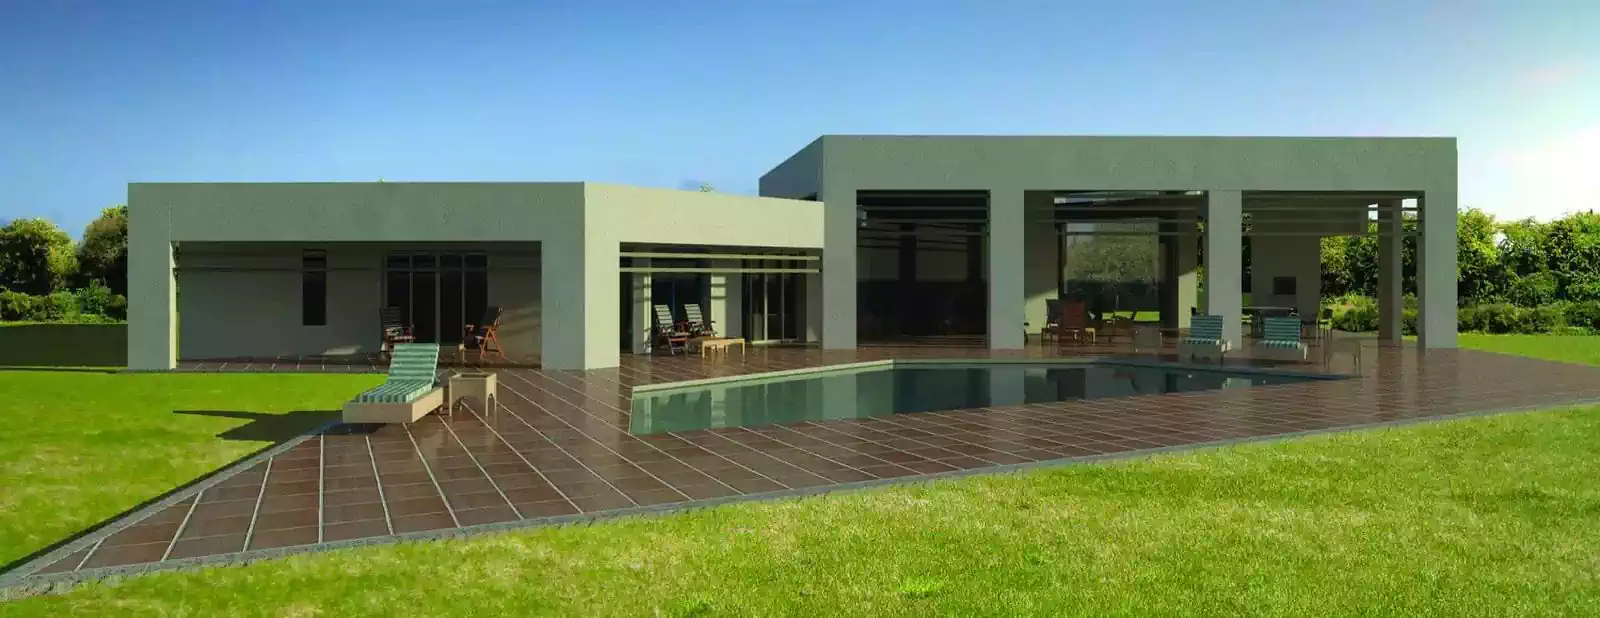 Modern house with double volume entrance and hourizontal windows and angular design in Bulawayo. 